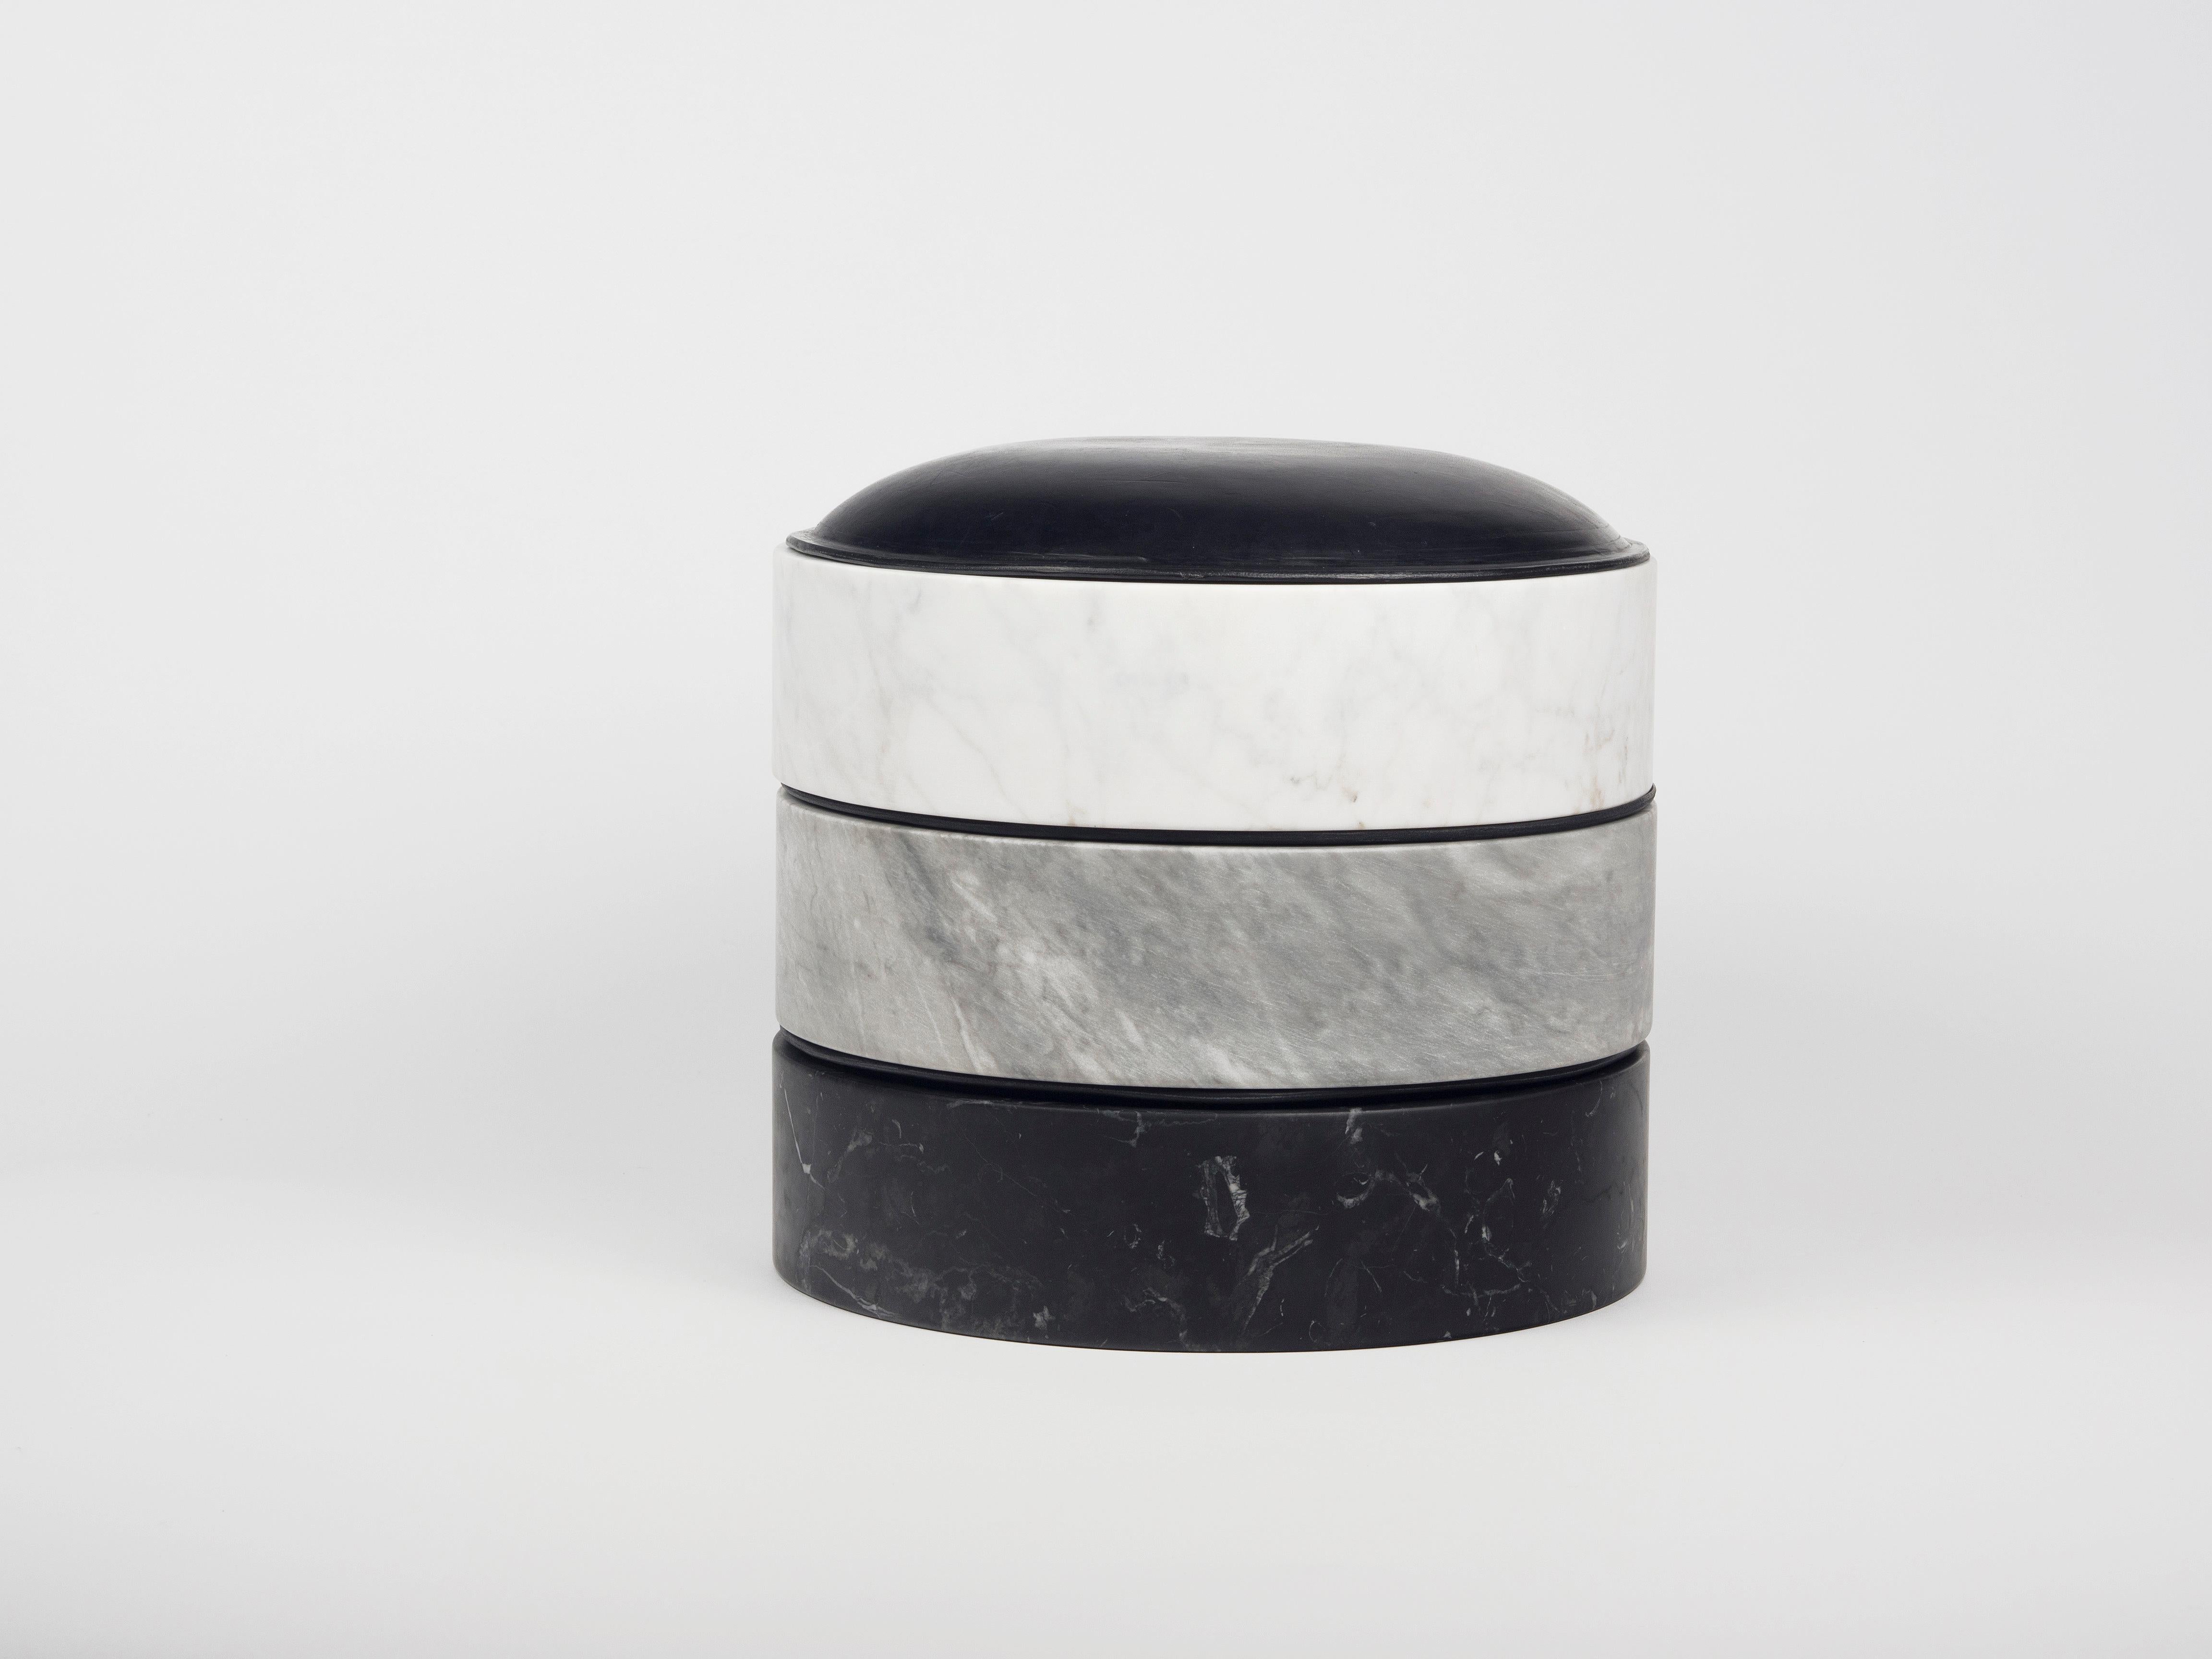 A container, key dish, jewelry box and hideaway in which to store the most precious objects and memories. Sottofondo consists of two modular and stackable base elements:
a marble container and a leather cover. The marble dug at the lathe and the